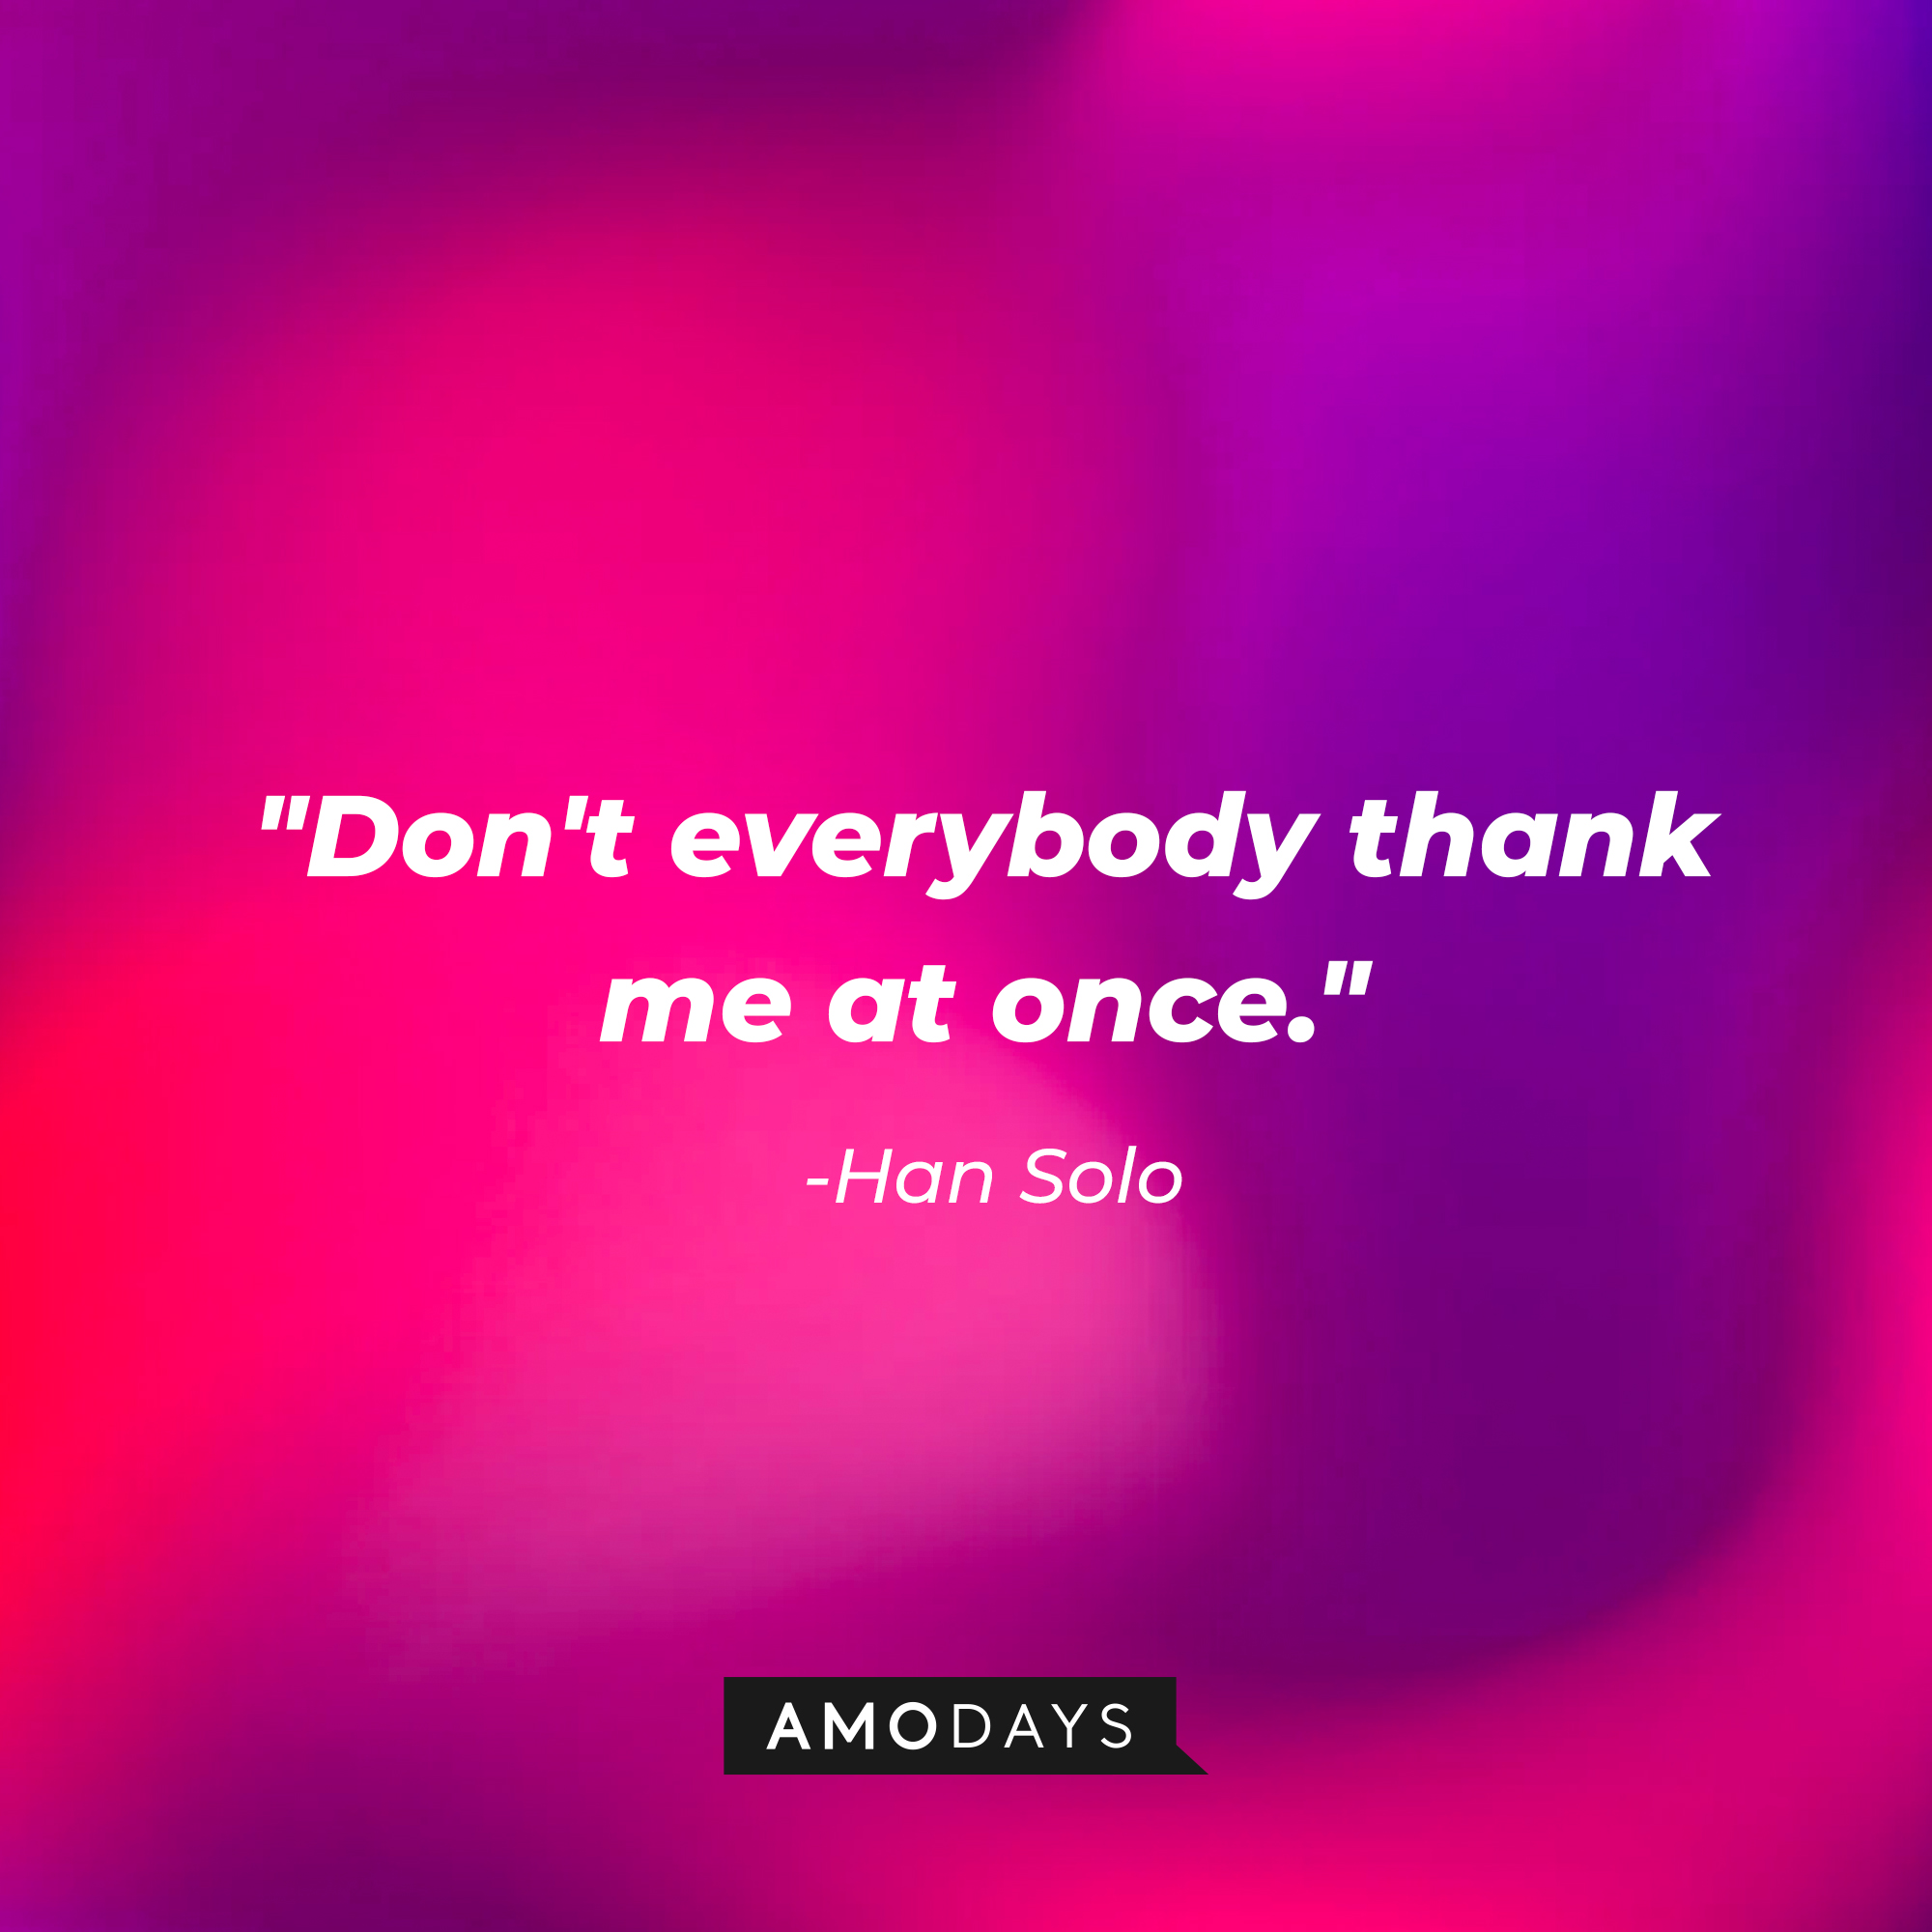 Han Solo’s quote: "Don't everybody thank me at once." | Source: AmoDays